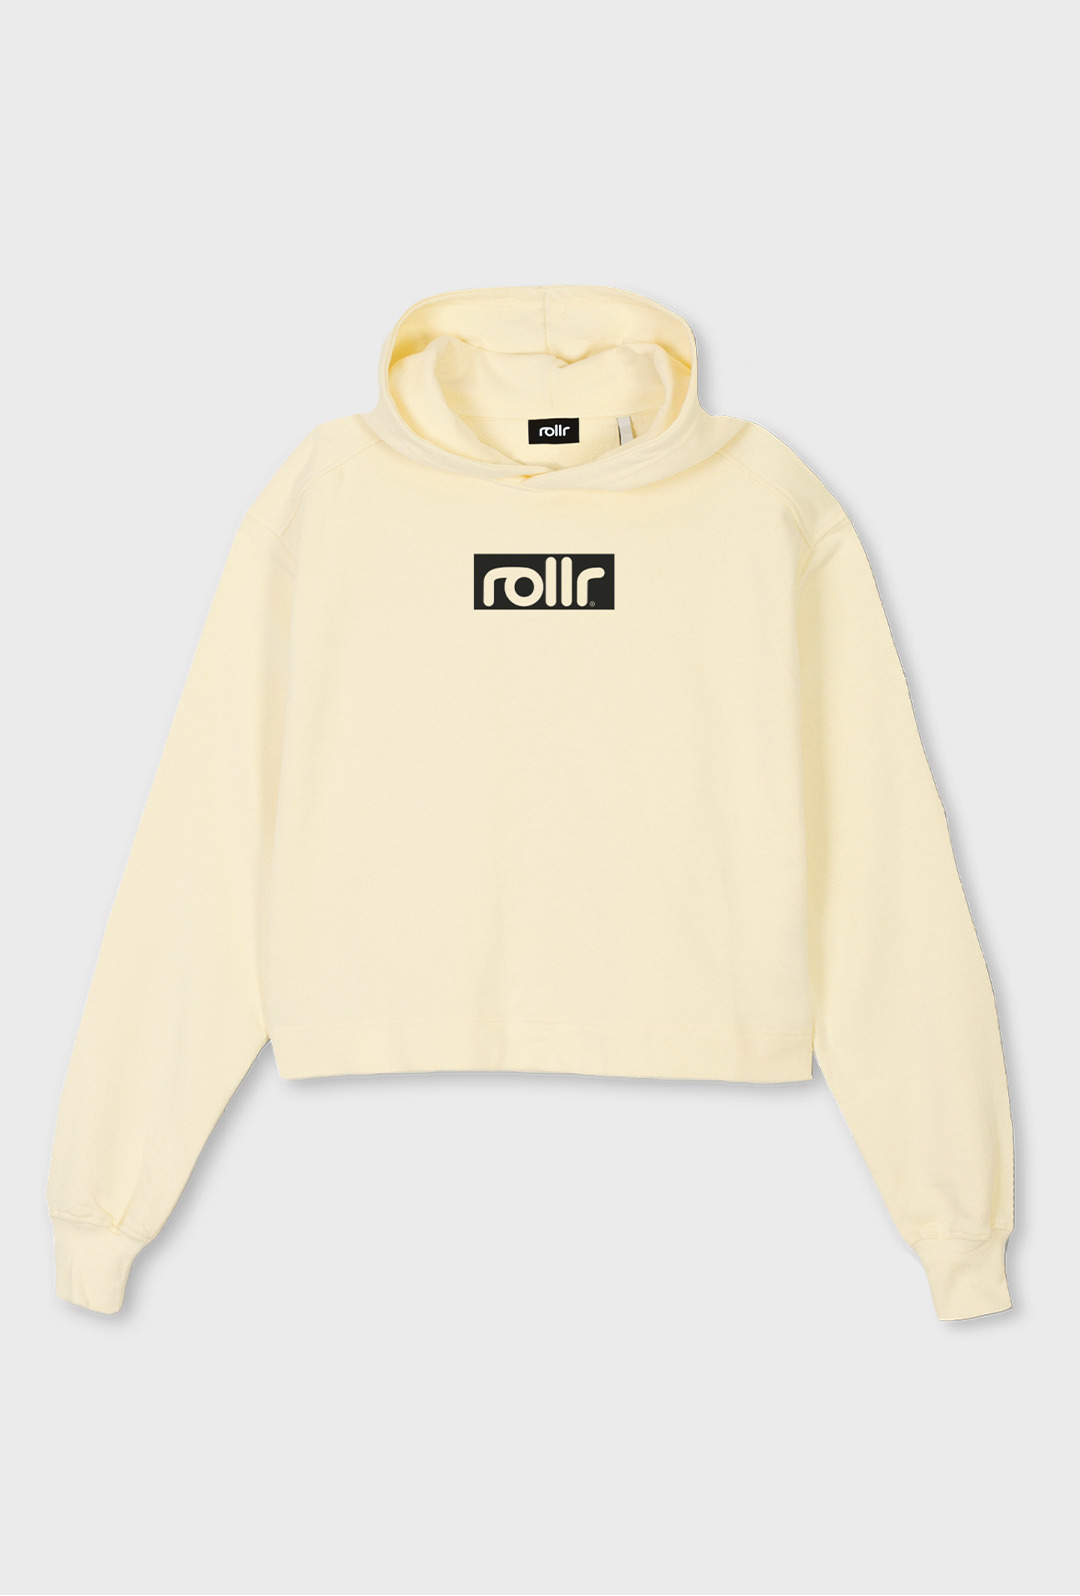 rollr clothing heavyweight vanilla cream box fit hoodie made from french terry fabric 100% organic cotton